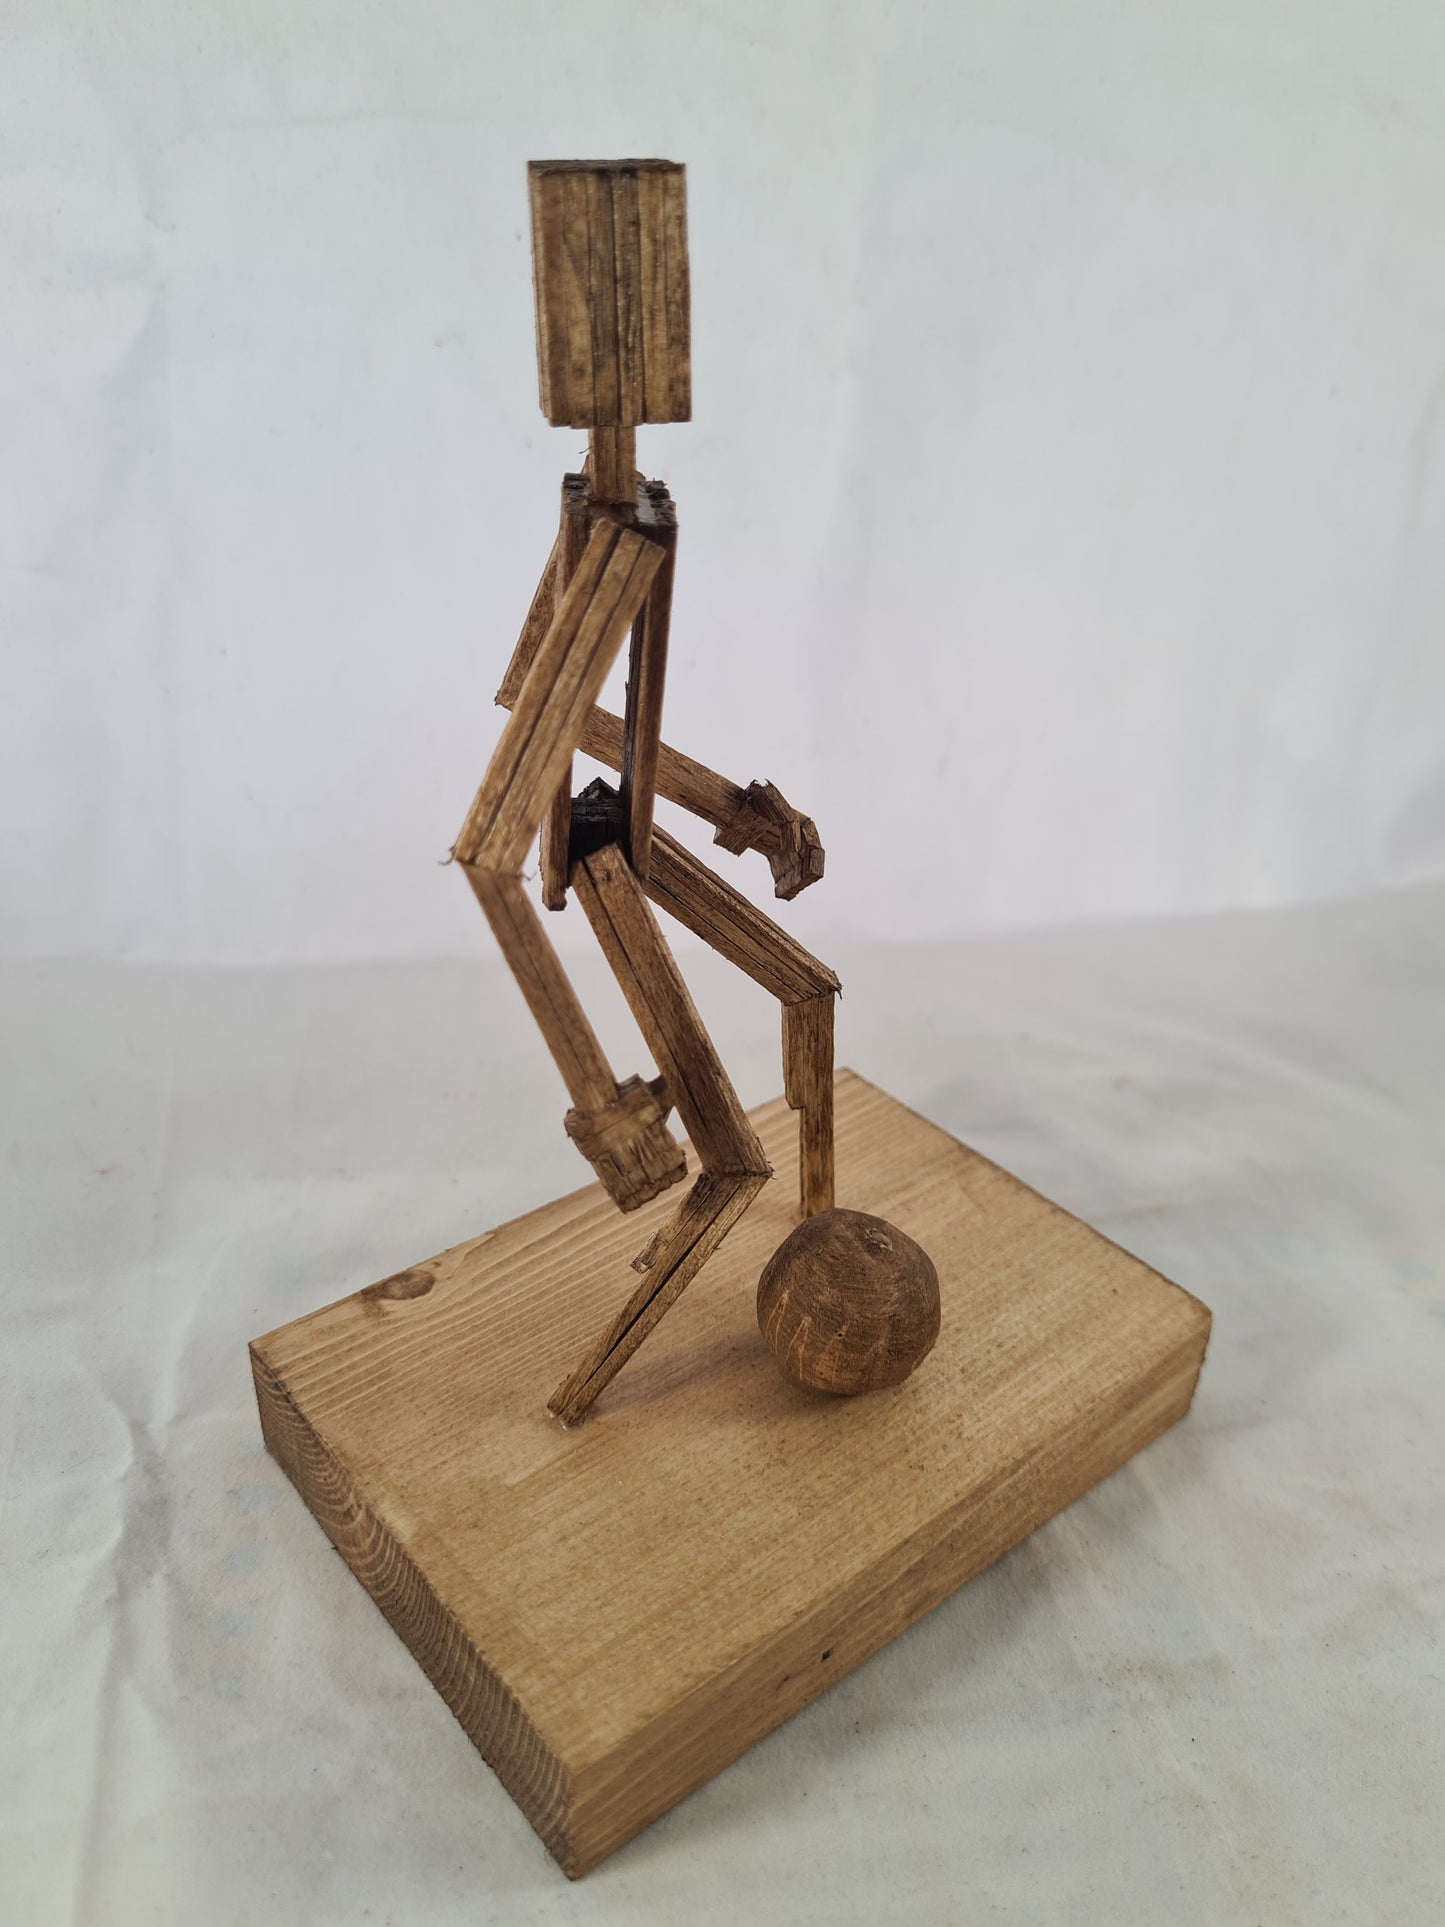 Footballer - Handcrafted Wooden Matchstick Figures - Gifts, Ornaments and Decor By Tiggidy Designs